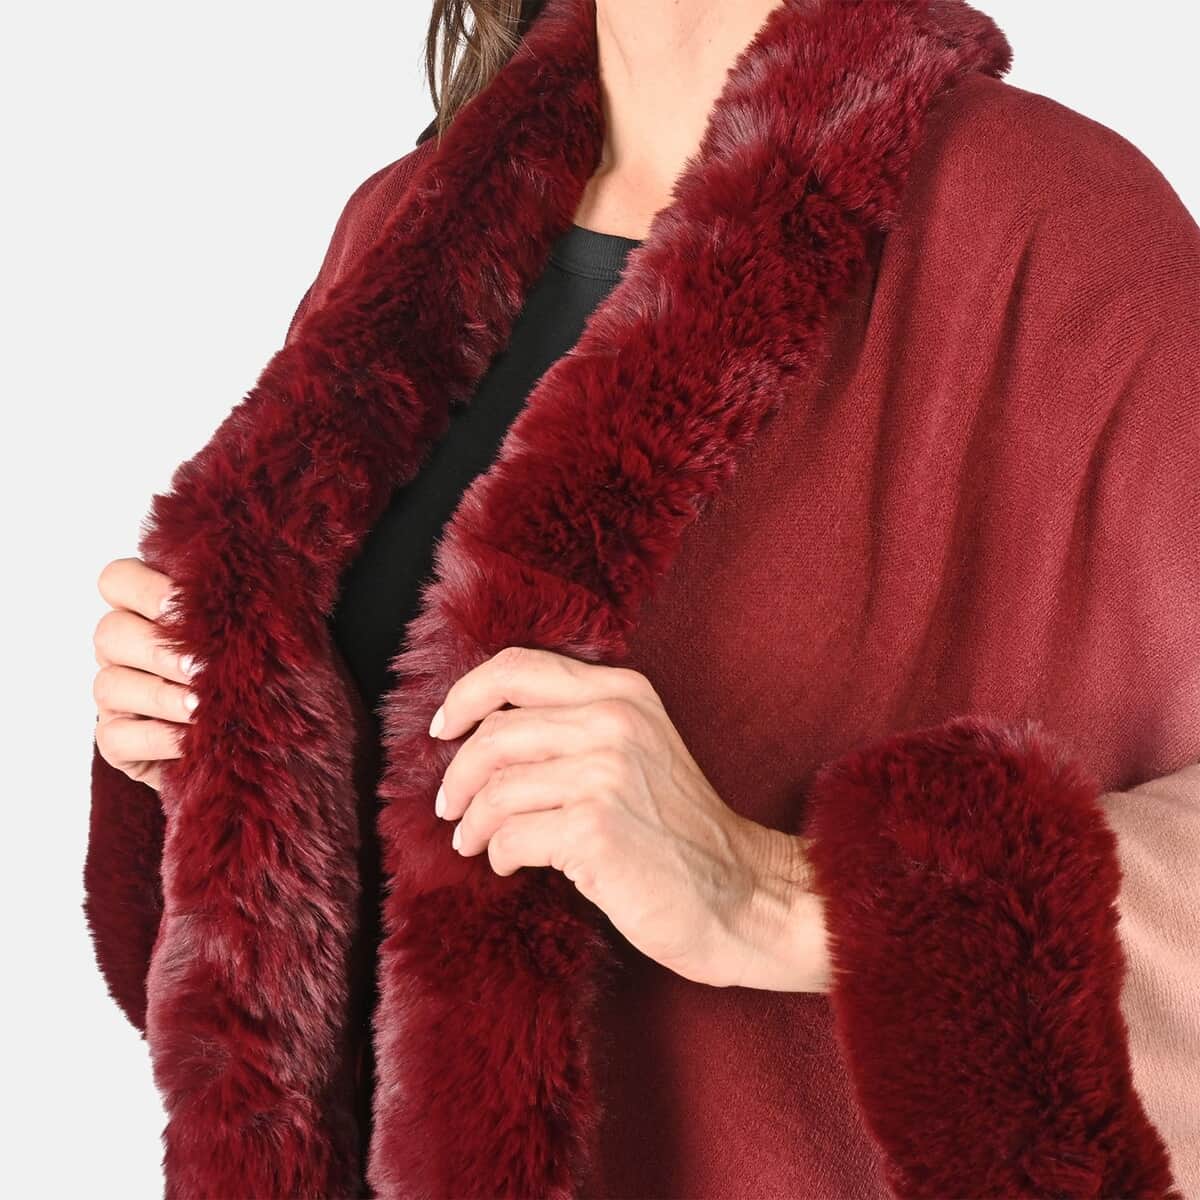 Tamsy Burgundy Ombre Cape with Faux Fur Trim - One Size Fits Most image number 4